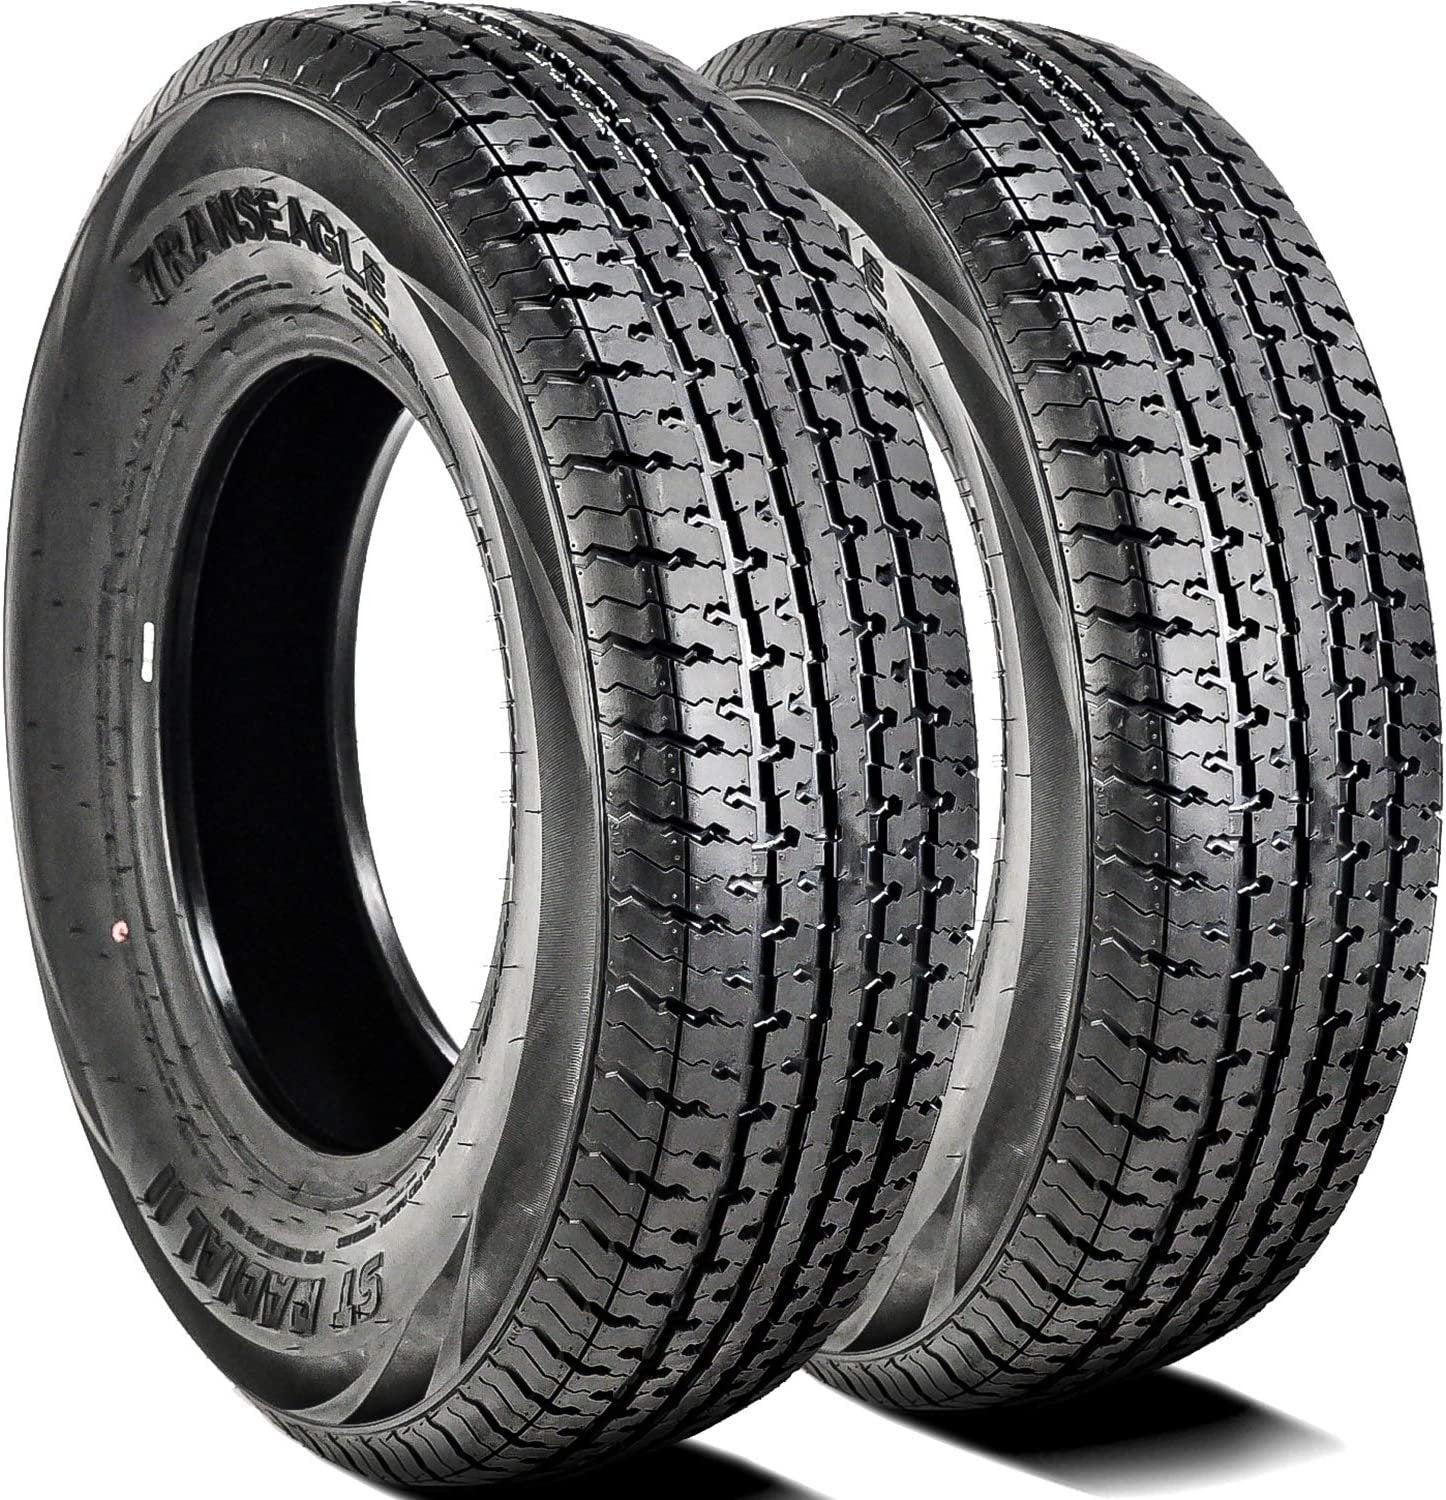 Set of 2 (TWO) Transeagle ST Radial II Premium Trailer Radial Tires-ST205/75R14 205/75/14